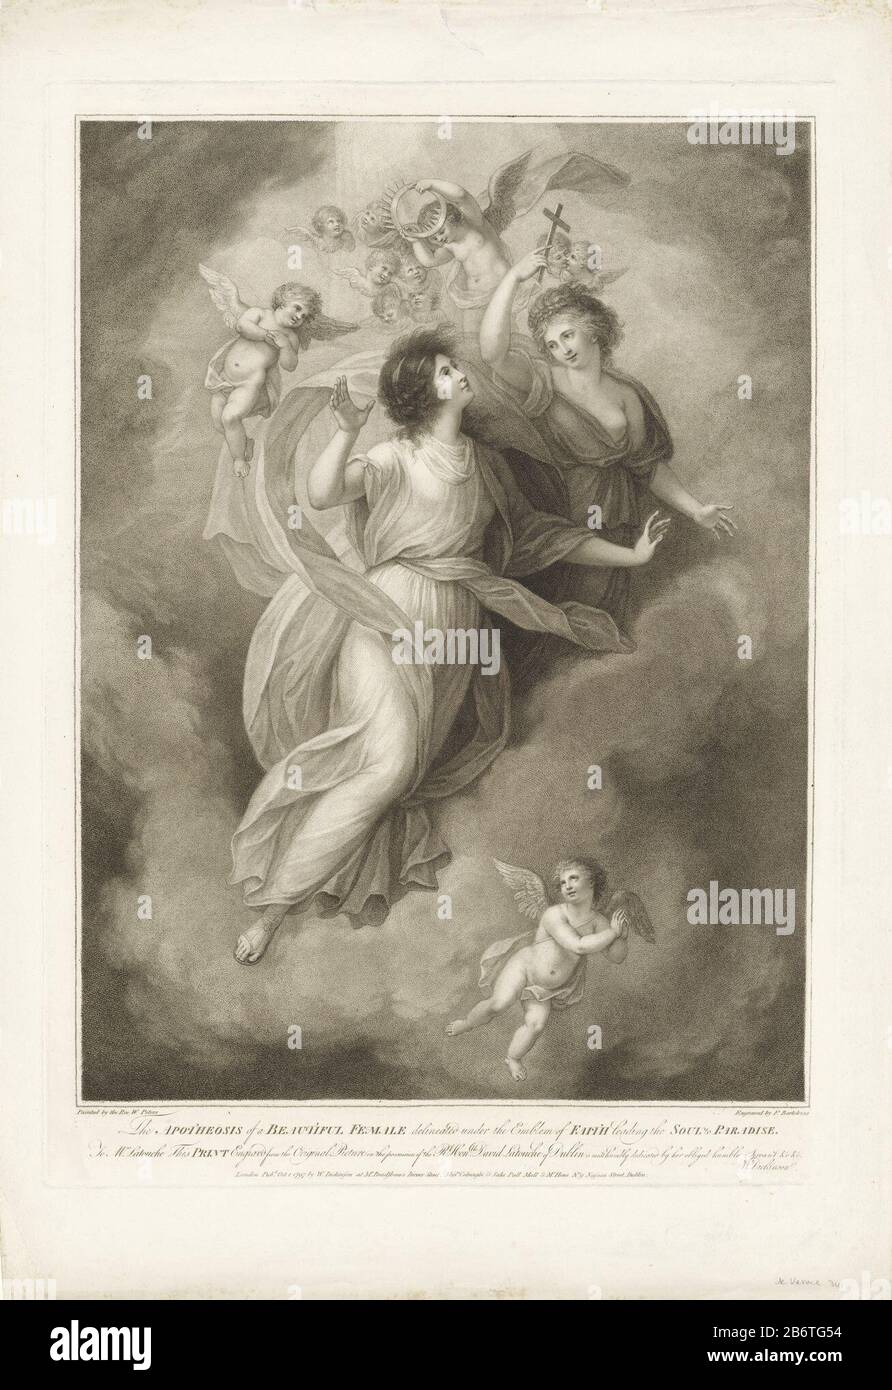 Het Geloof een vrouw naar het Paradijs brengende The Apotheosis of a Beautiful Female delineated under the Emblem of Faith leading the Soul to Paradise (titel op object) Allegory with the apotheosis of a woman. The personification of the Faith (Fides), along with putti, leading the woman to Paradise. Title and assignment in English ondermarge. Manufacturer : printmaker: Francesco Bartolozzi (listed property) to painting: Matthew William Peters (listed building) Publisher: William Dickinson (listed building) publisher: Colnaghi & Co (listed on object ) commissioned by William Dickinson (listed Stock Photo